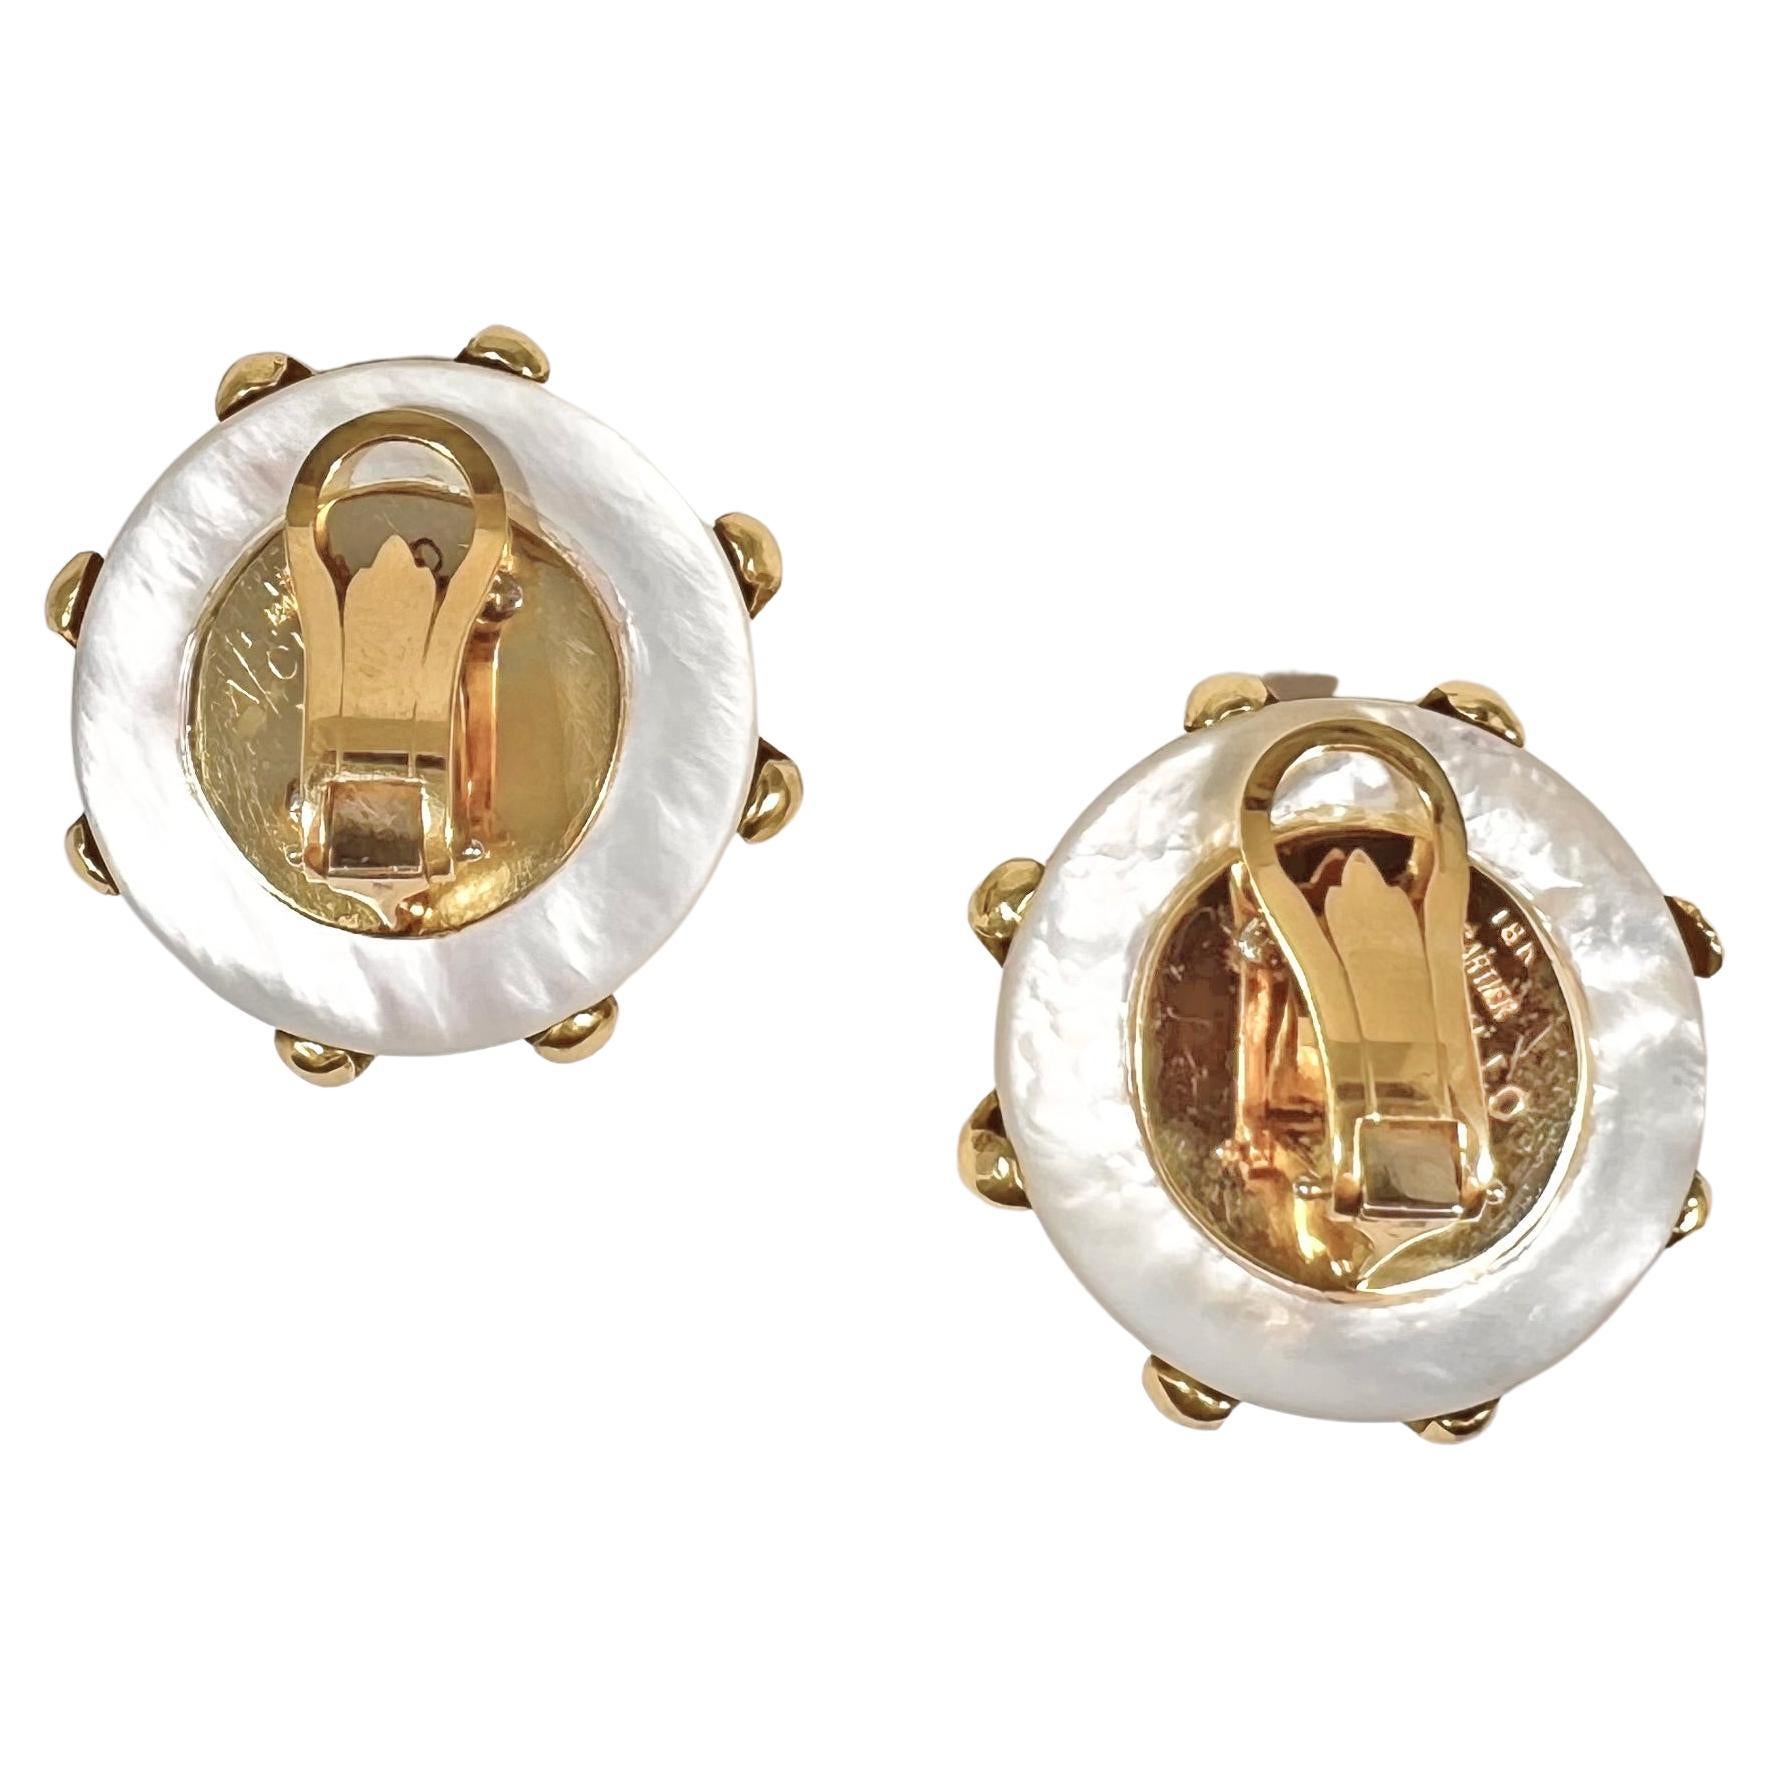 Modern Cartier Aldo Cipullo Gold Mother-of-Pearl Onyx Earrings For Sale